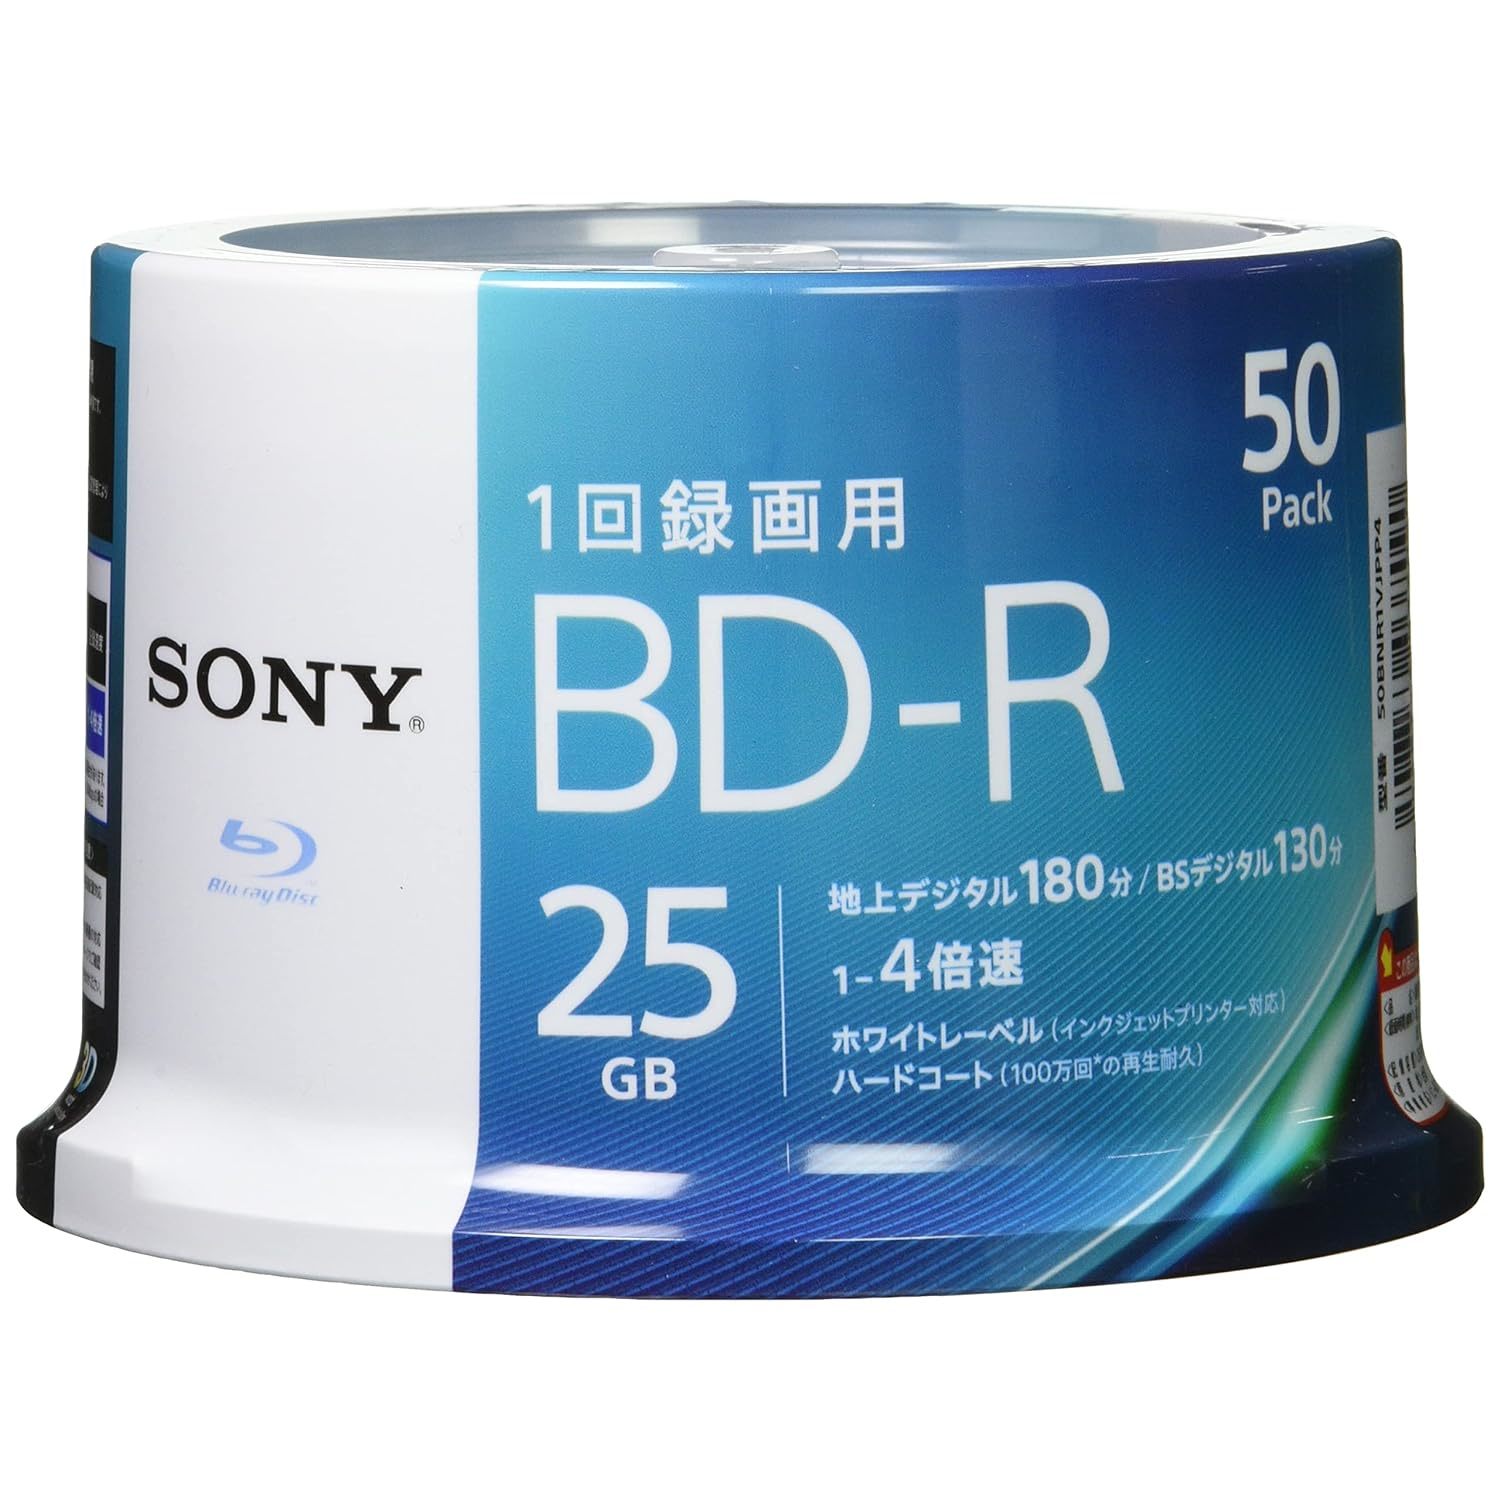 SONY video for a Blu-ray disc 50BNR1VJPP4 (BD-R 1 layer: 4-speed 50 sheets pack) - $89.29